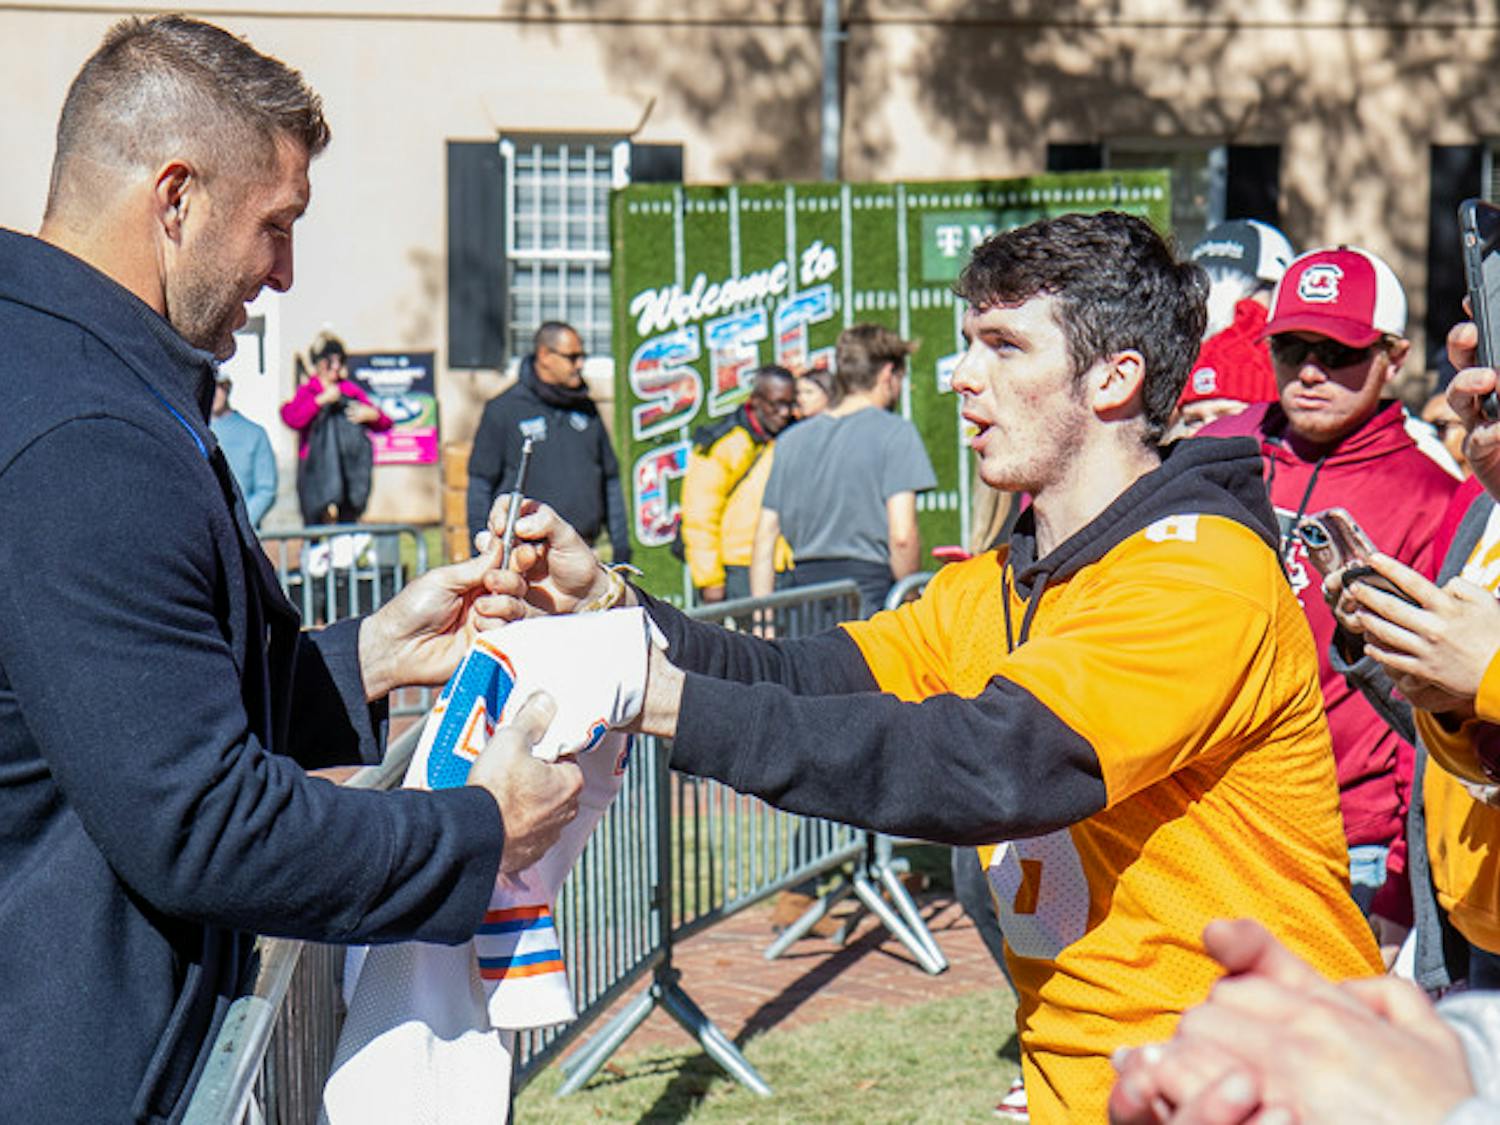 Tim Tebow signs a Tenessee fan's Florida jersey at the end of the SEC Nation pregame show on Nov. 19, 2022. Tim Tebow was a Hesiman trophy winner at Florida and played for several teams in the NFL.